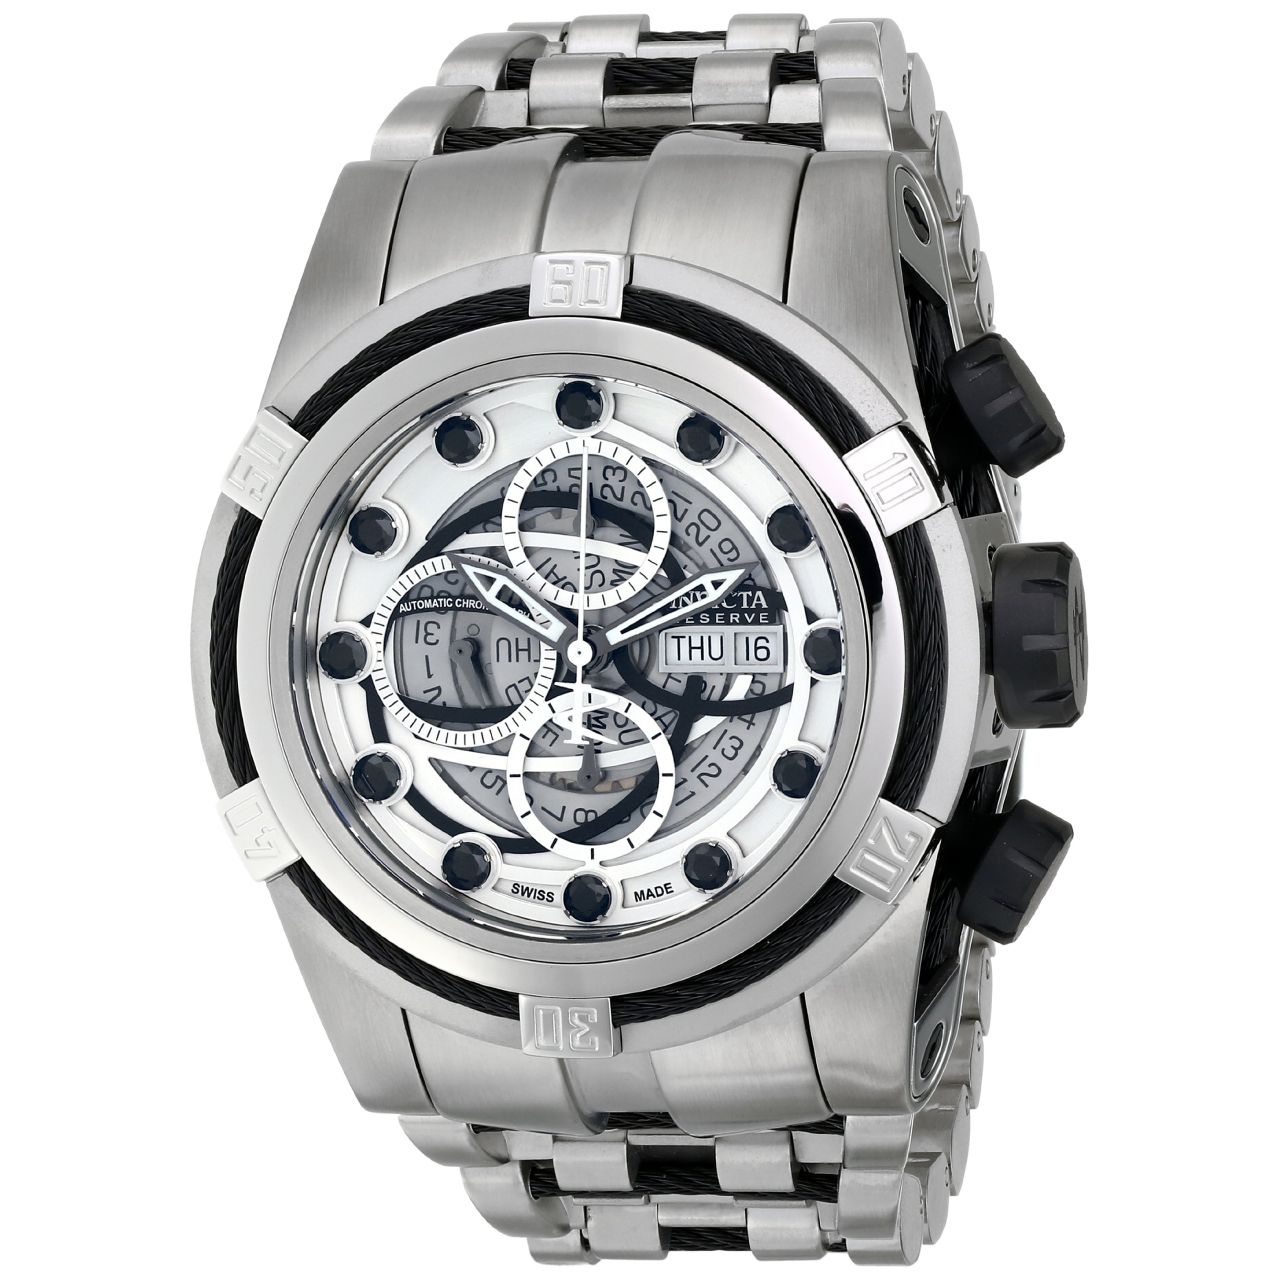 Invicta Men's 14306 Bolt Analog Display Swiss Automatic Silver Watch